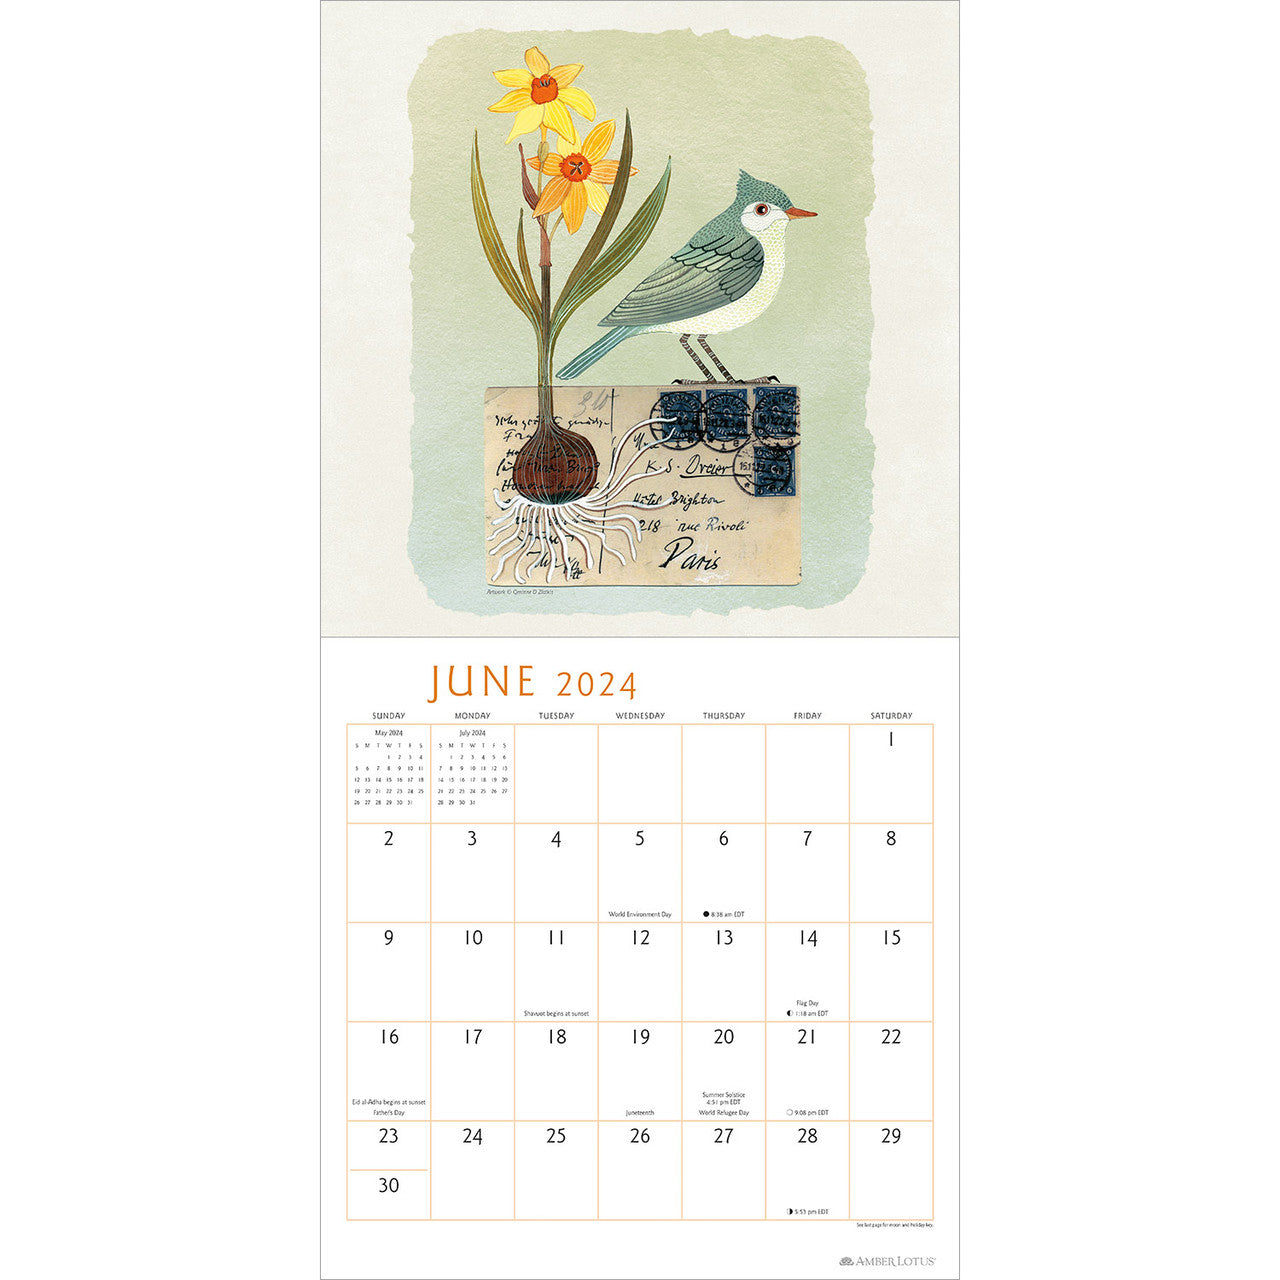 2024 Feathered Friends - Square Wall Calendar